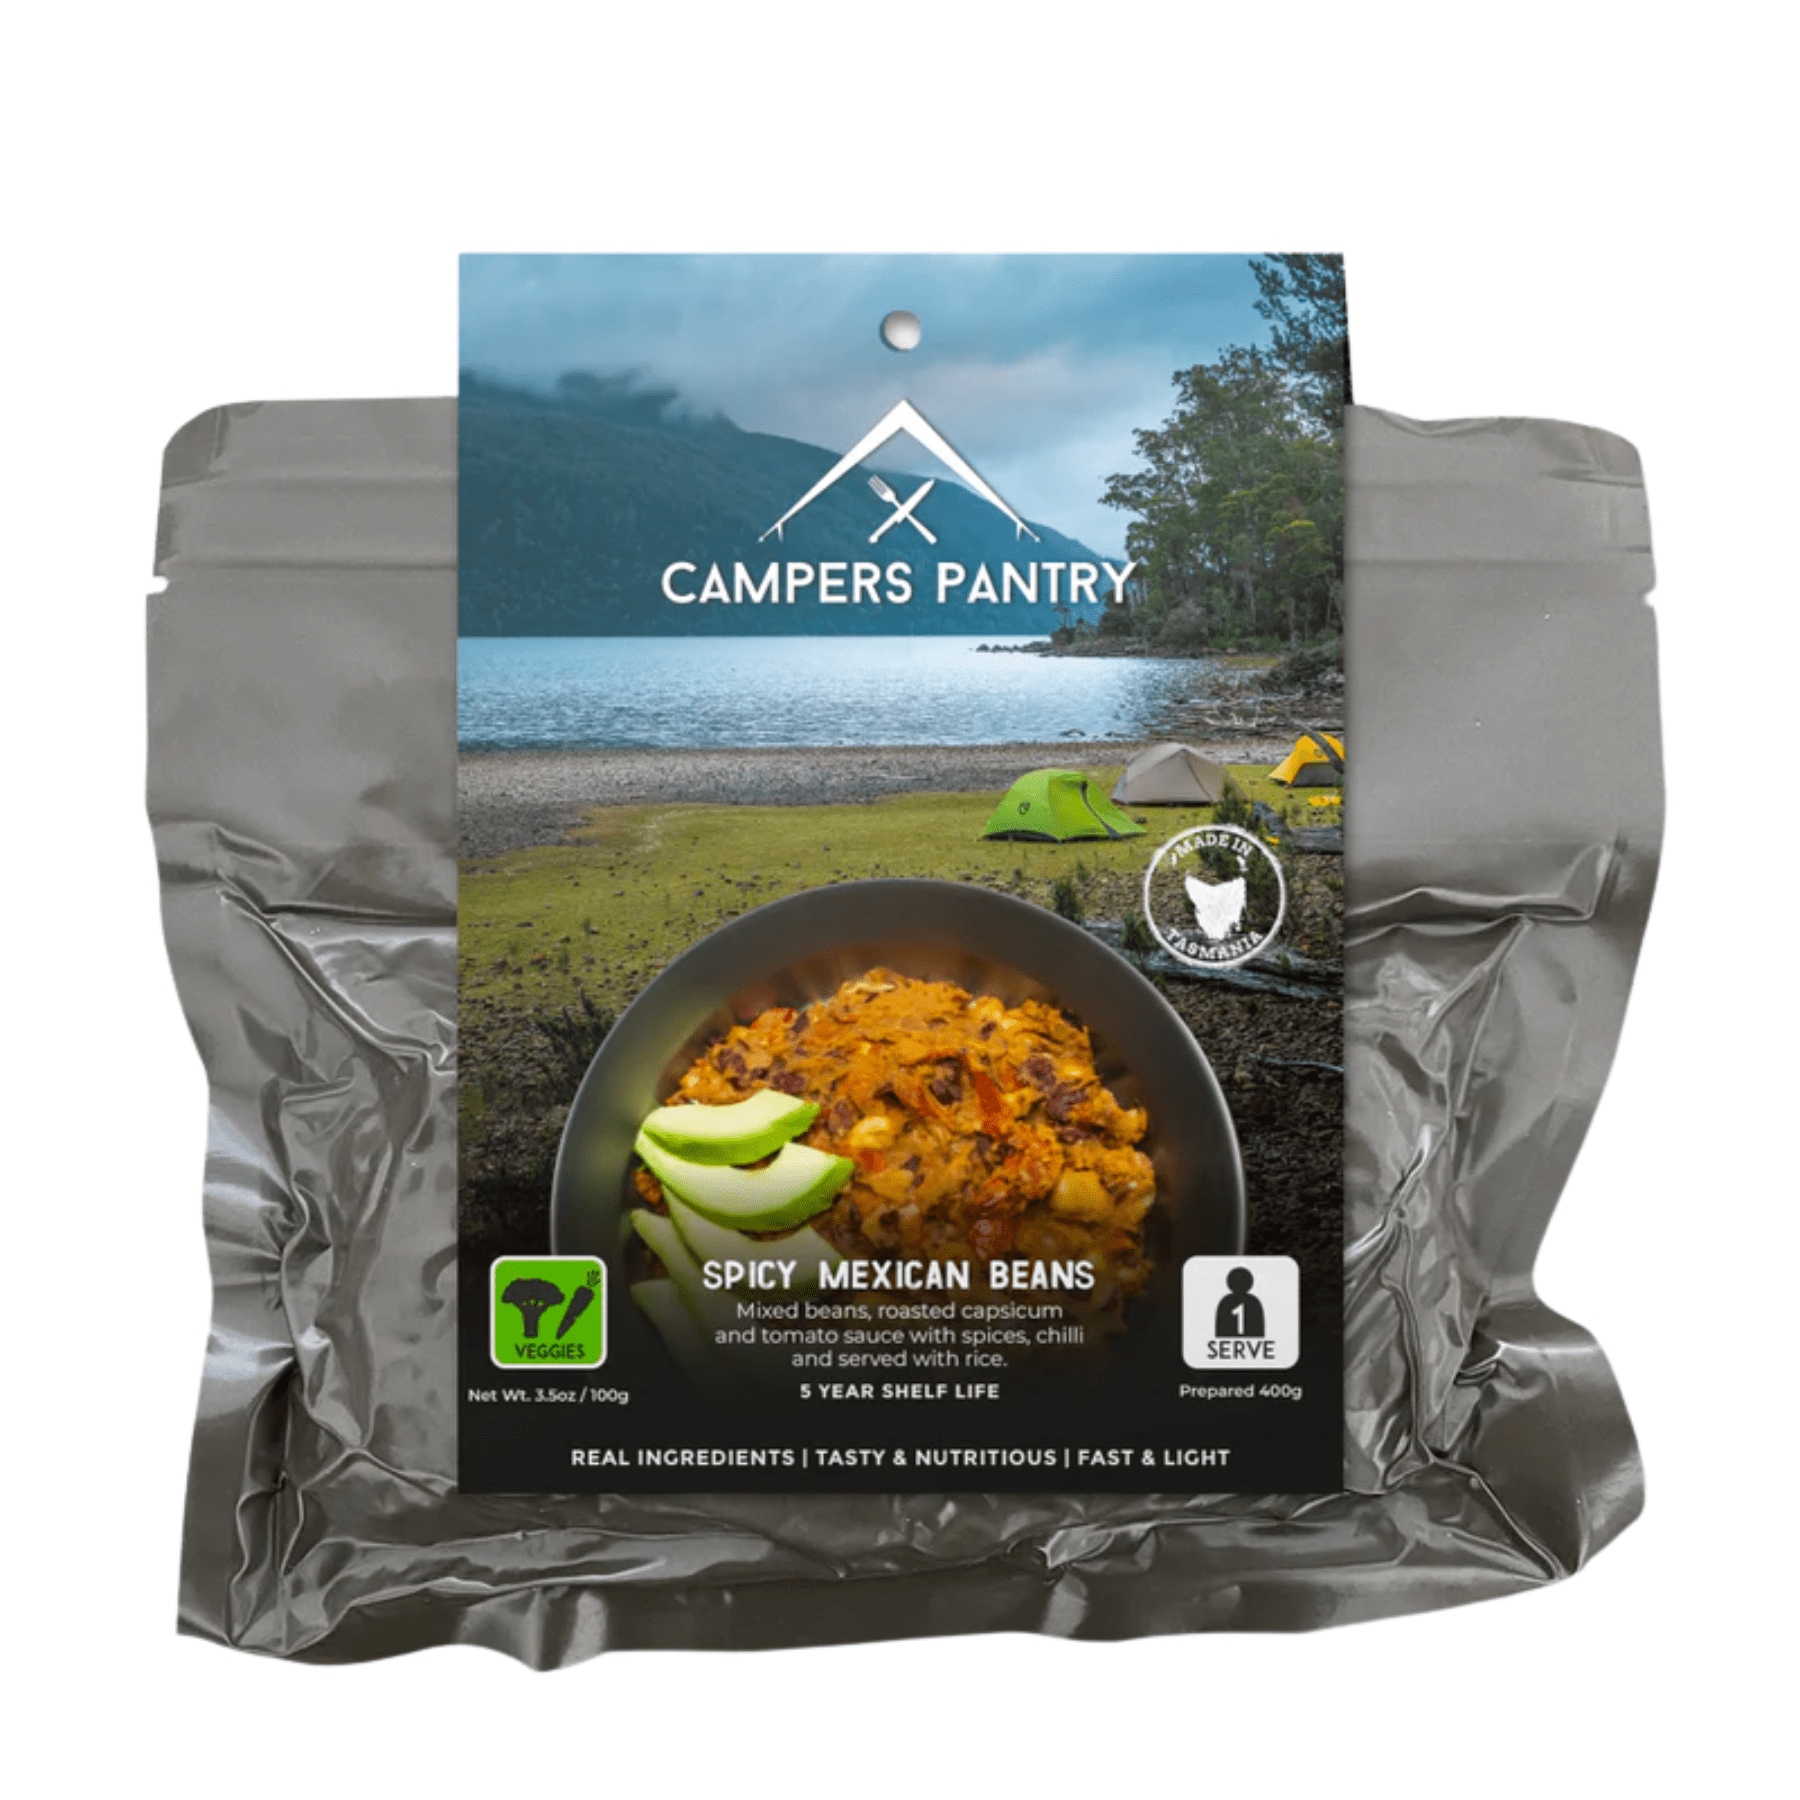 Campers Pantry Dehydrated Meals Single Serve / Spicy Mexican Beans Freeze-dried Expedition Meals